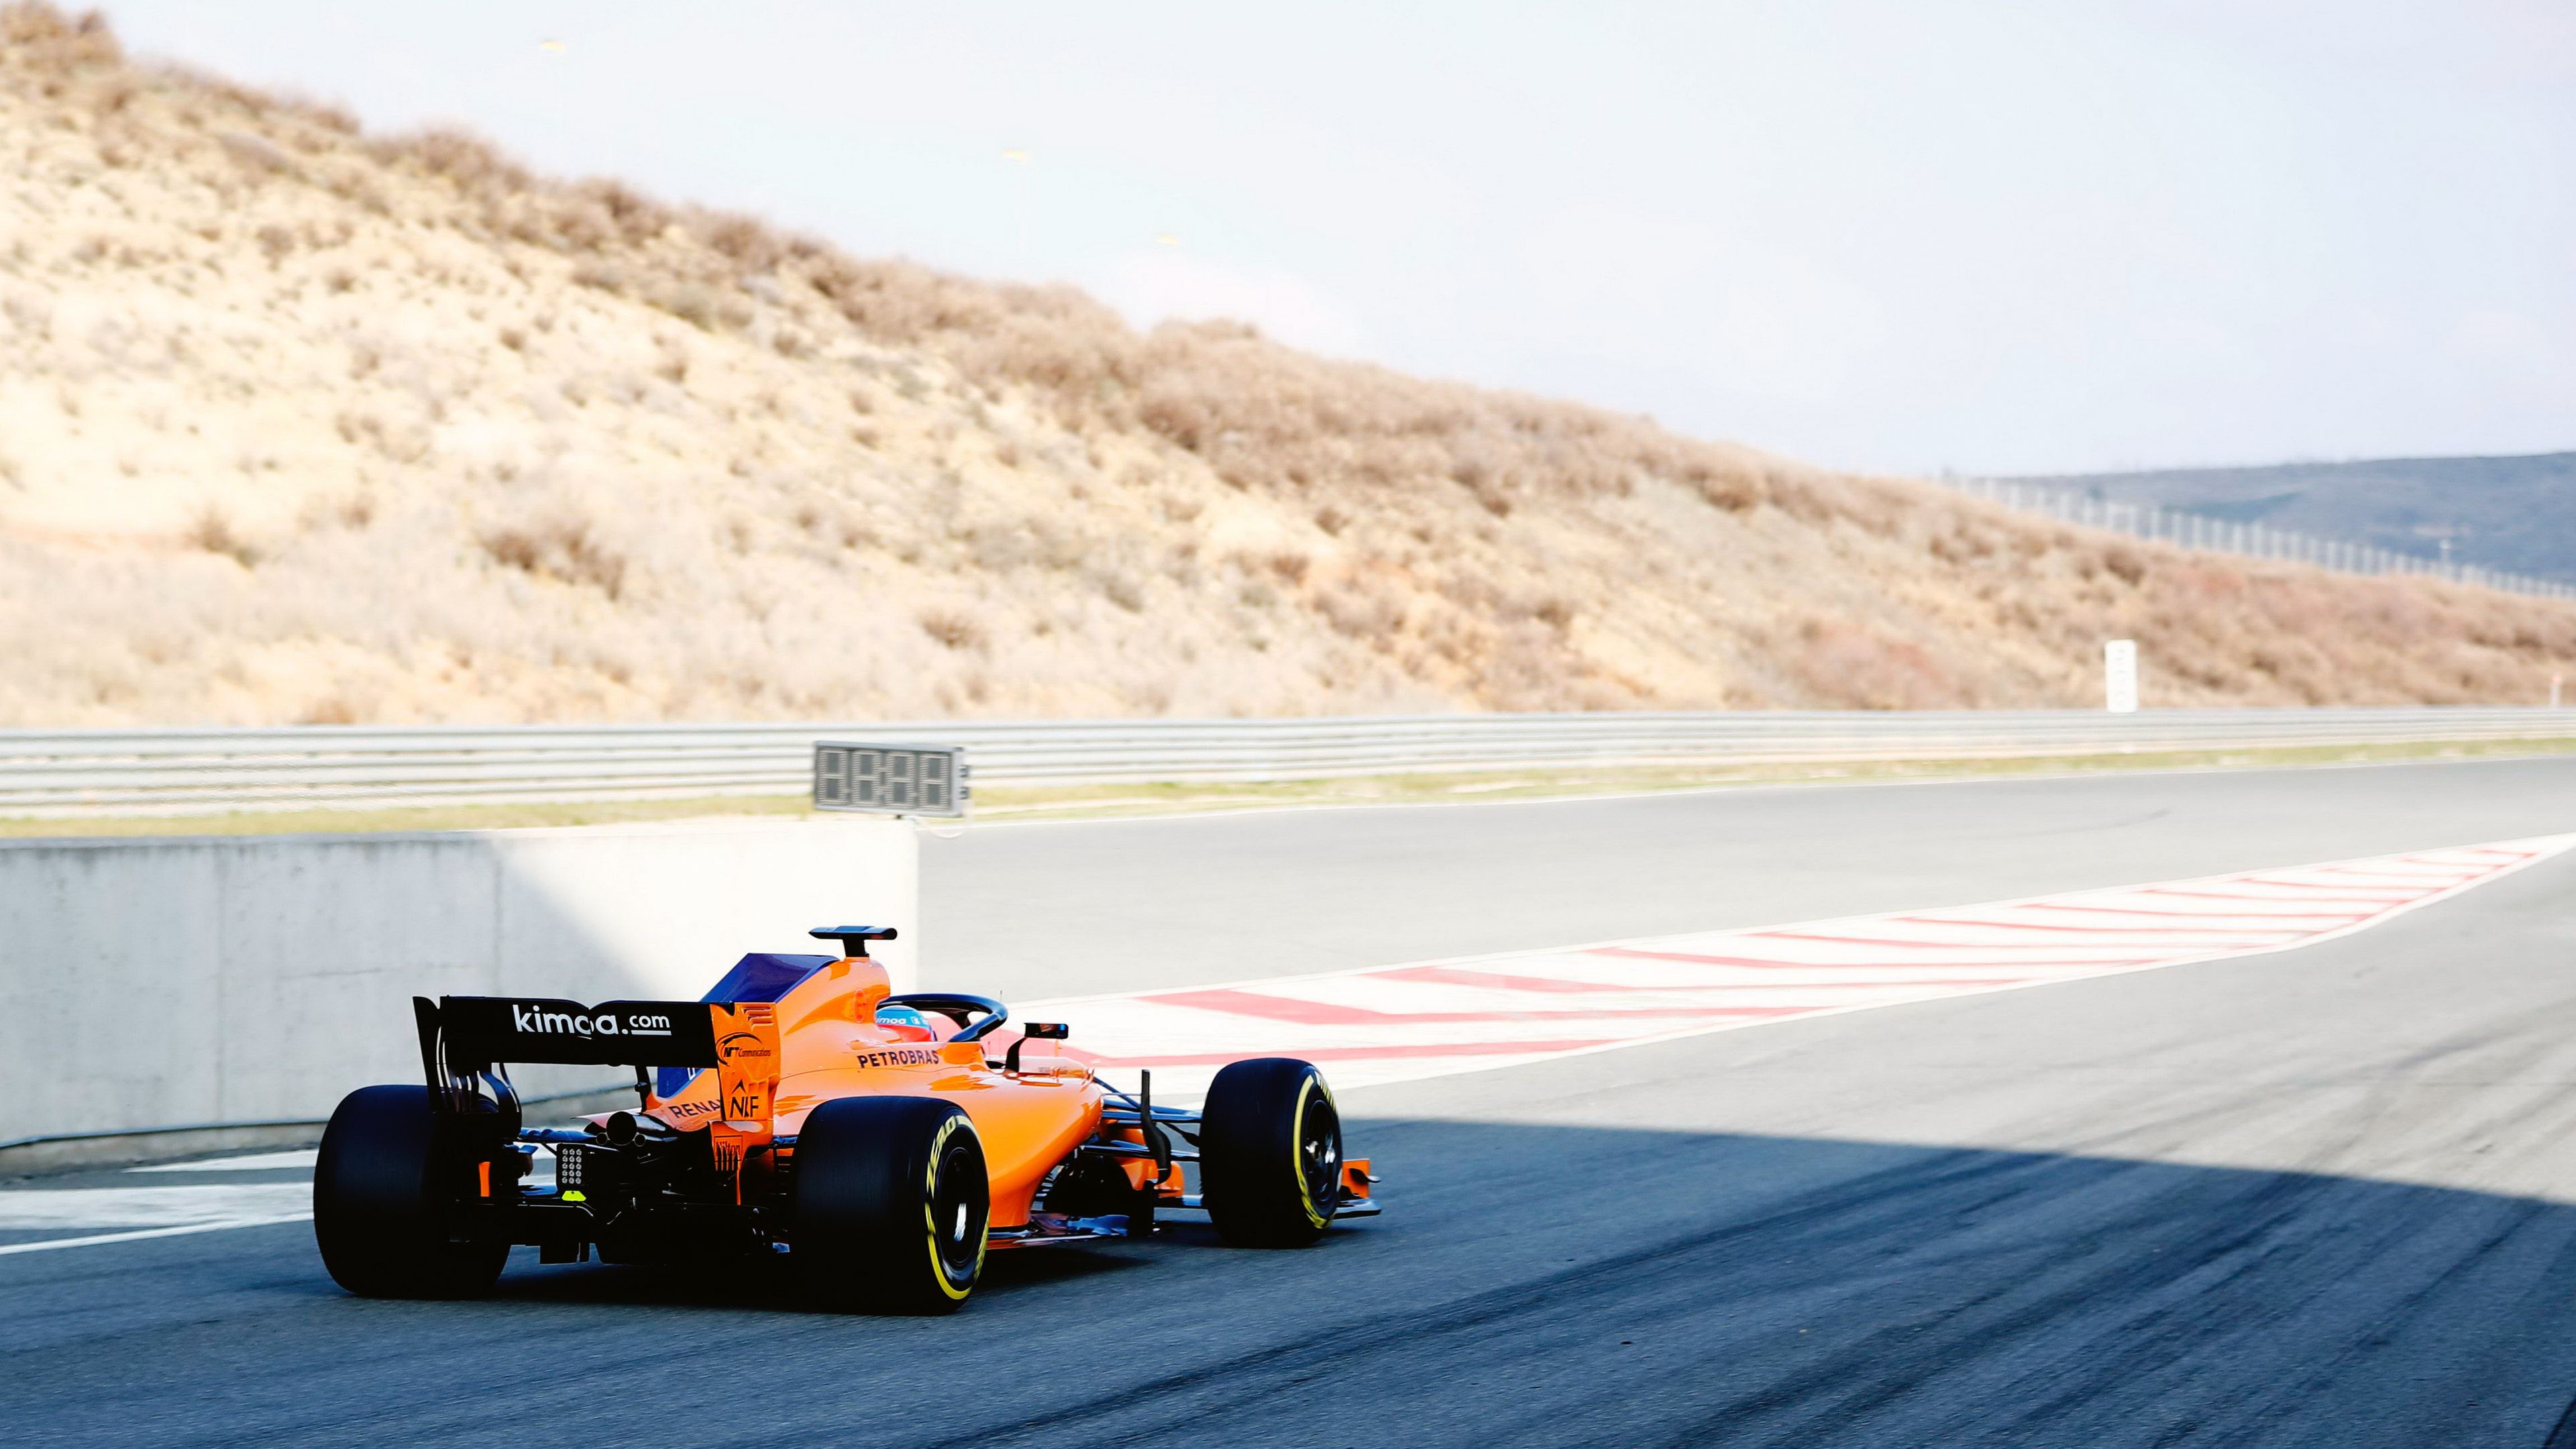 F1 Wallpapers Hd posted by Christopher Cunningham